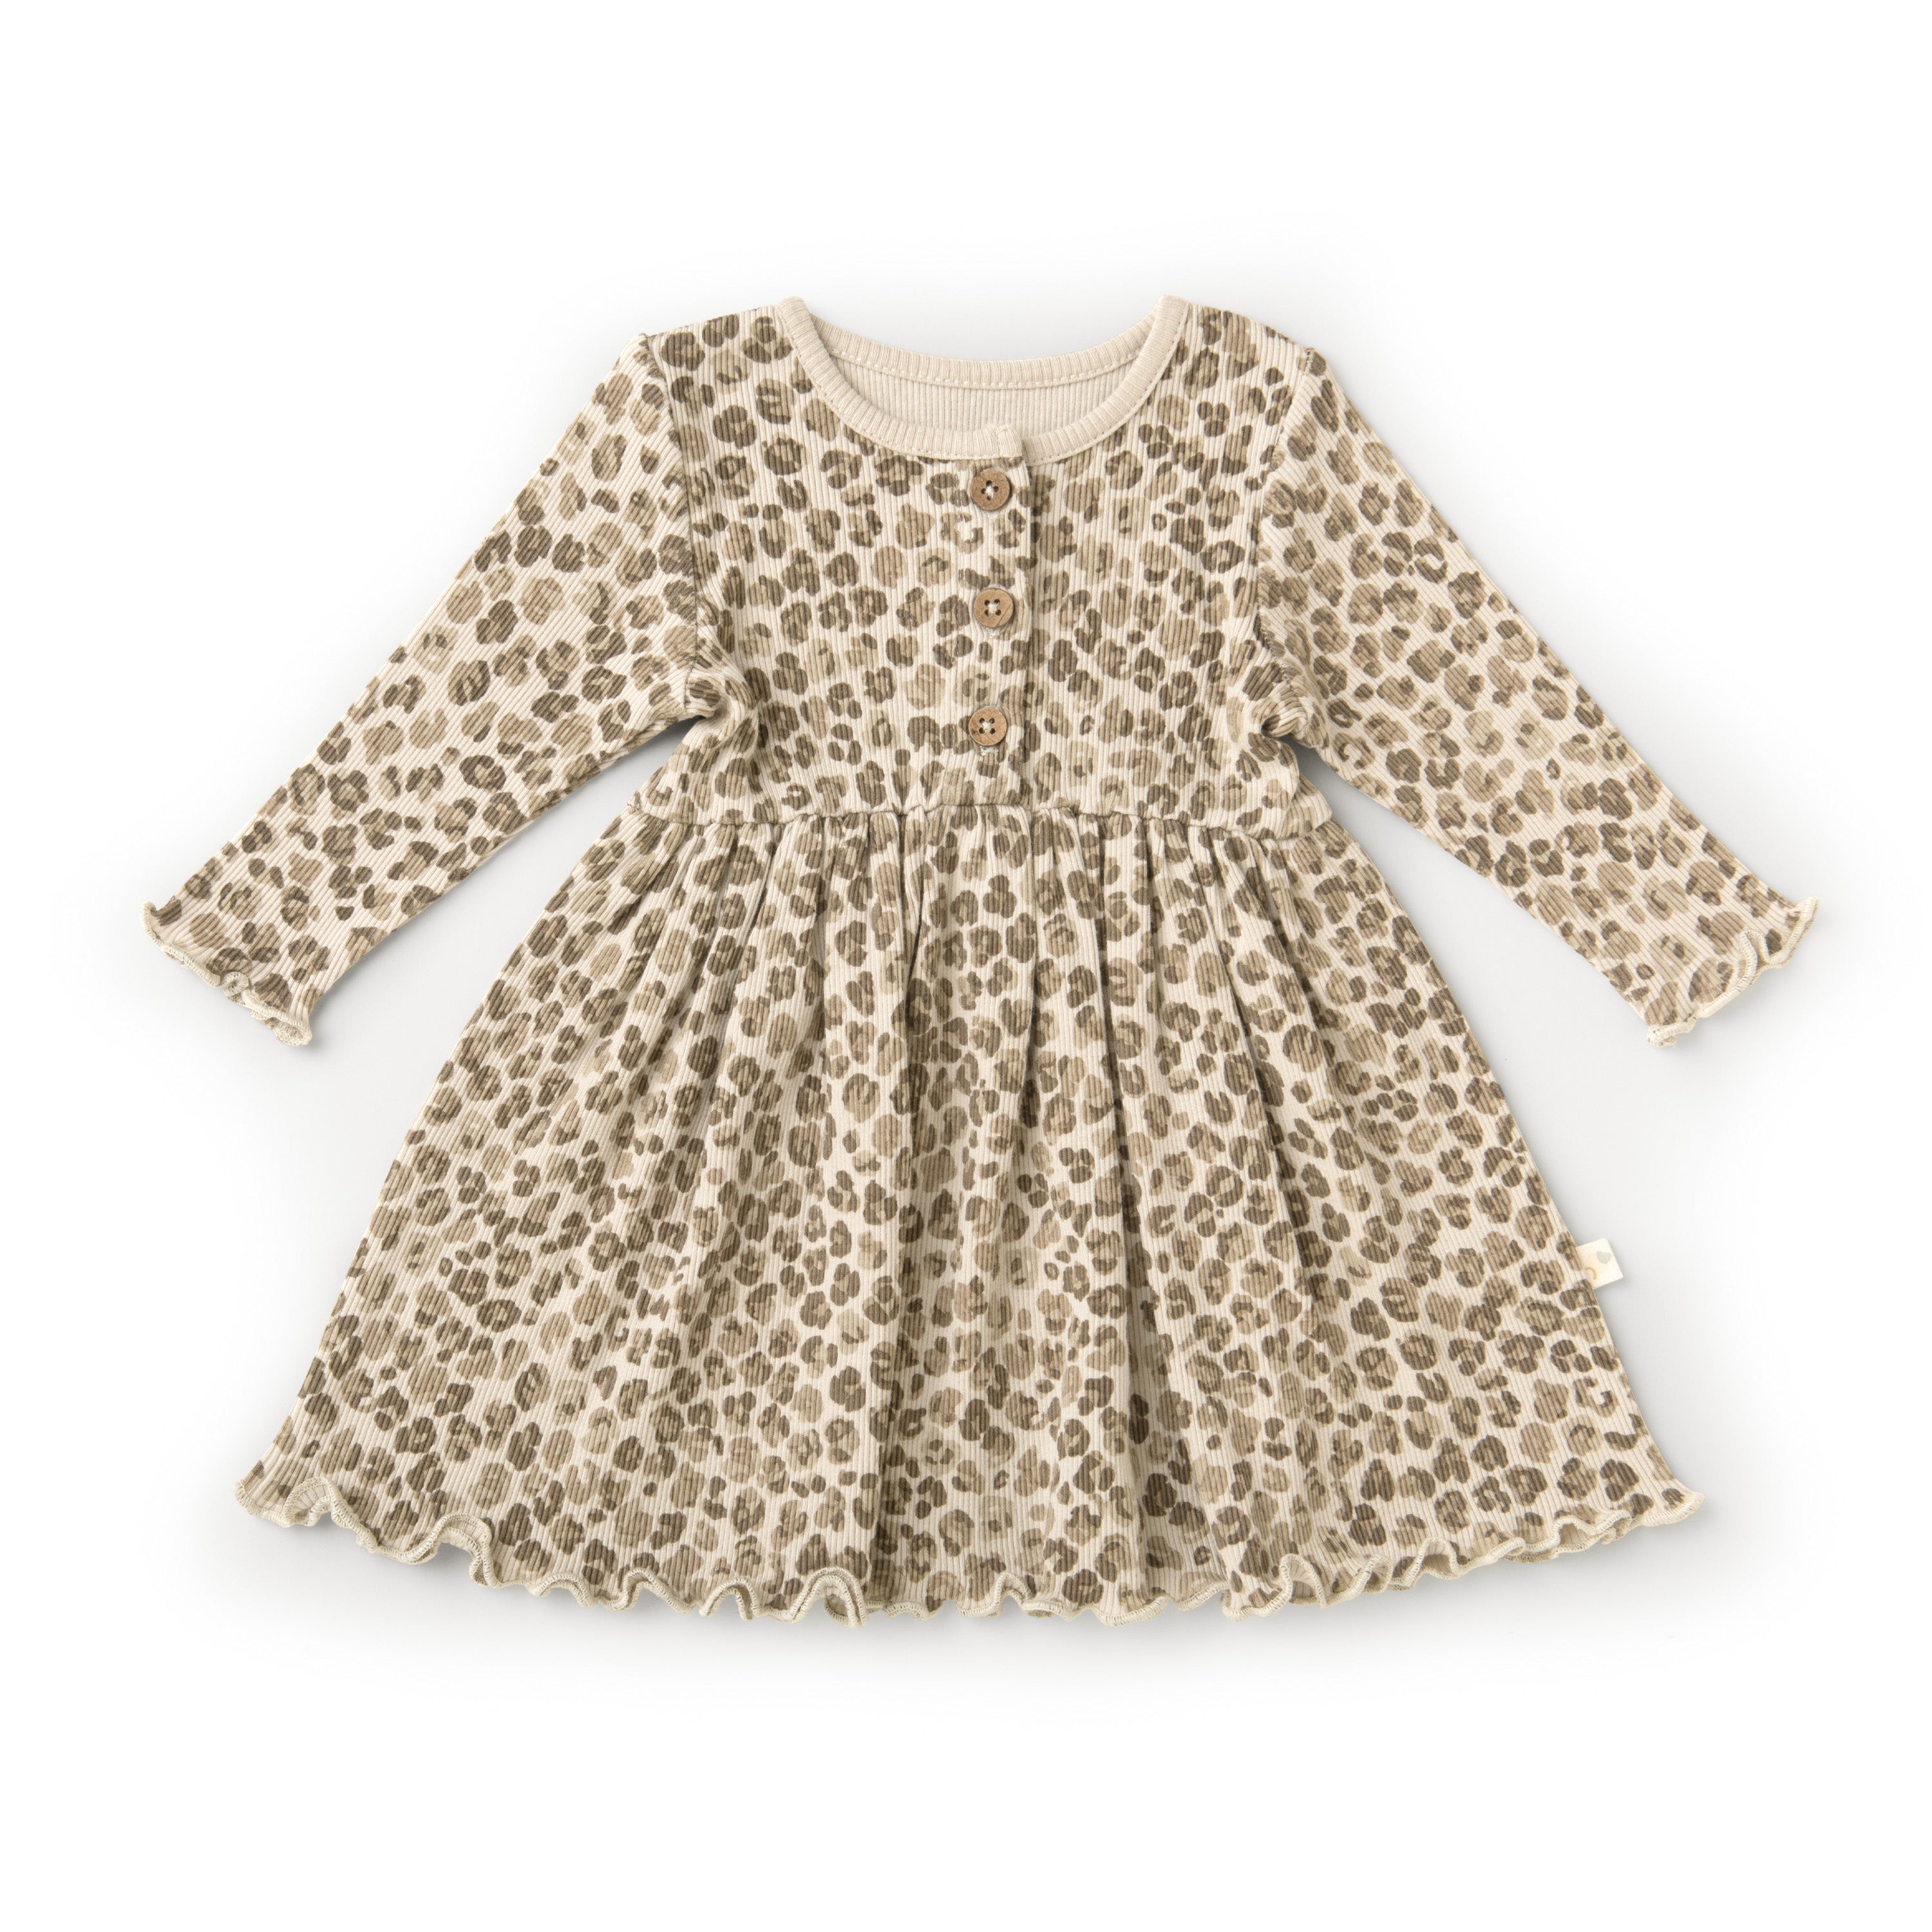 A baby's Organic Long Sleeve Twirl Dress - Spotted from Organic Baby with a leopard print pattern, featuring a round neck and three decorative buttons at the chest, laid flat on a white background.